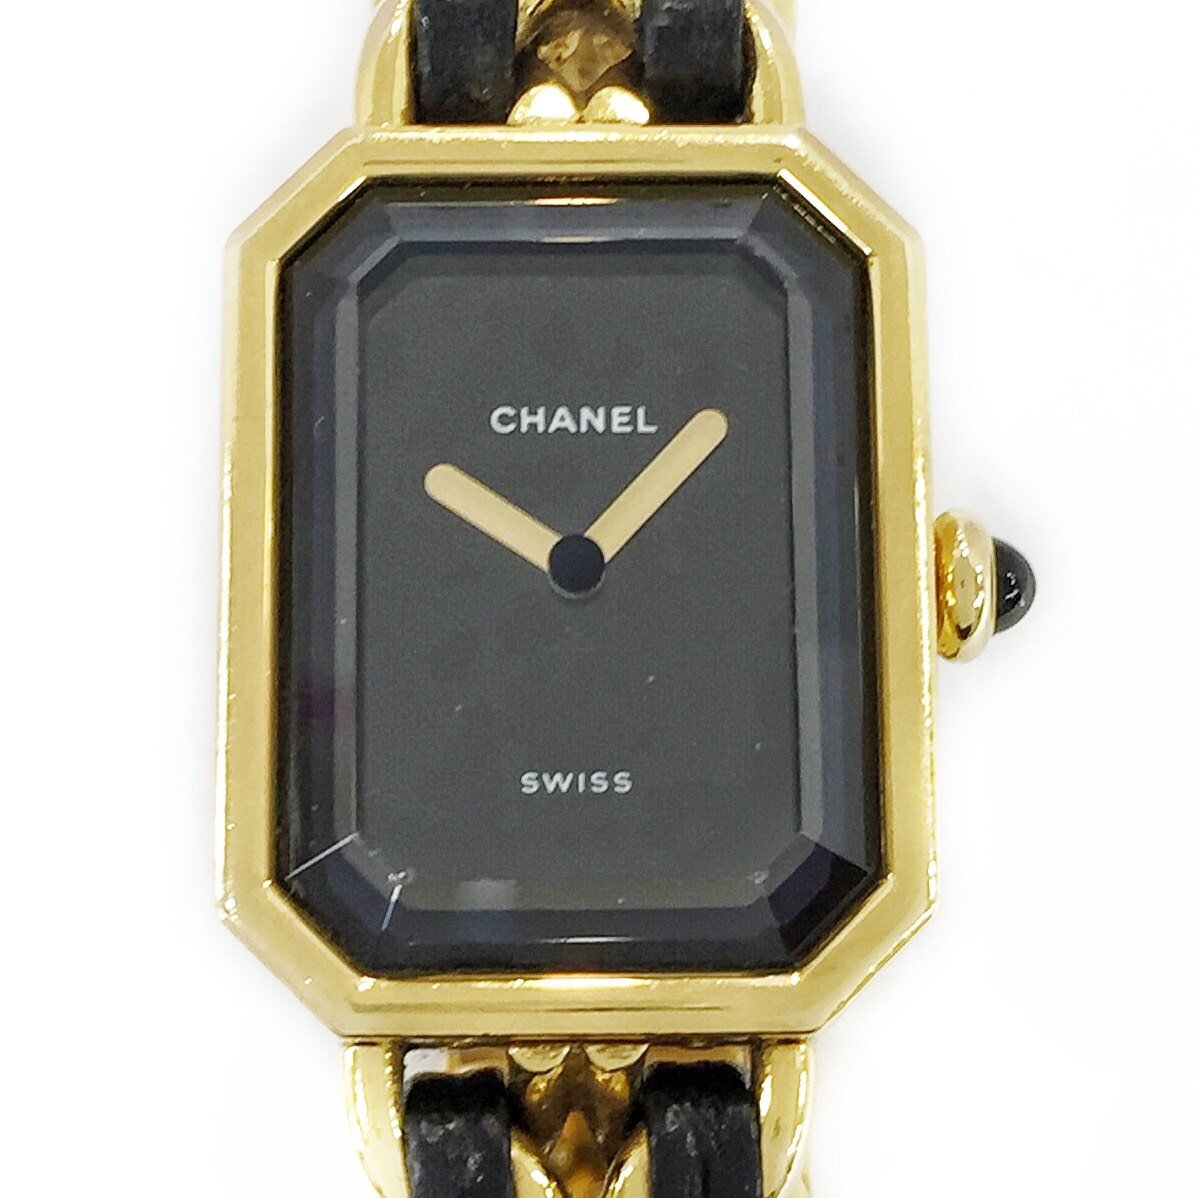  necessary repair goods!! immovable!!CHANEL/ Chanel Premiere GP size S lady's quartz watch 